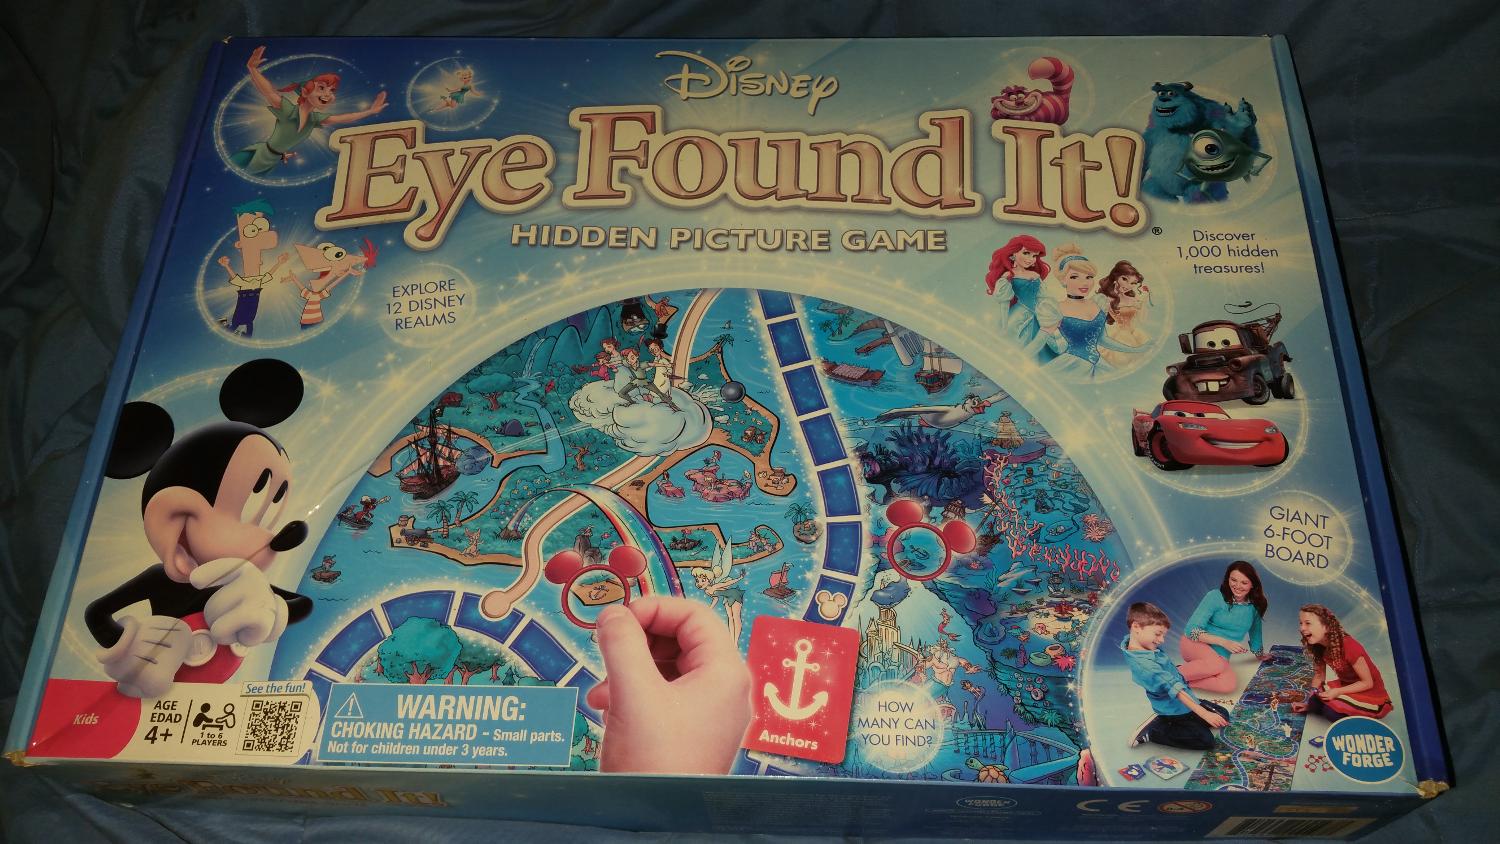 disney eye found it hidden picture card game instructions